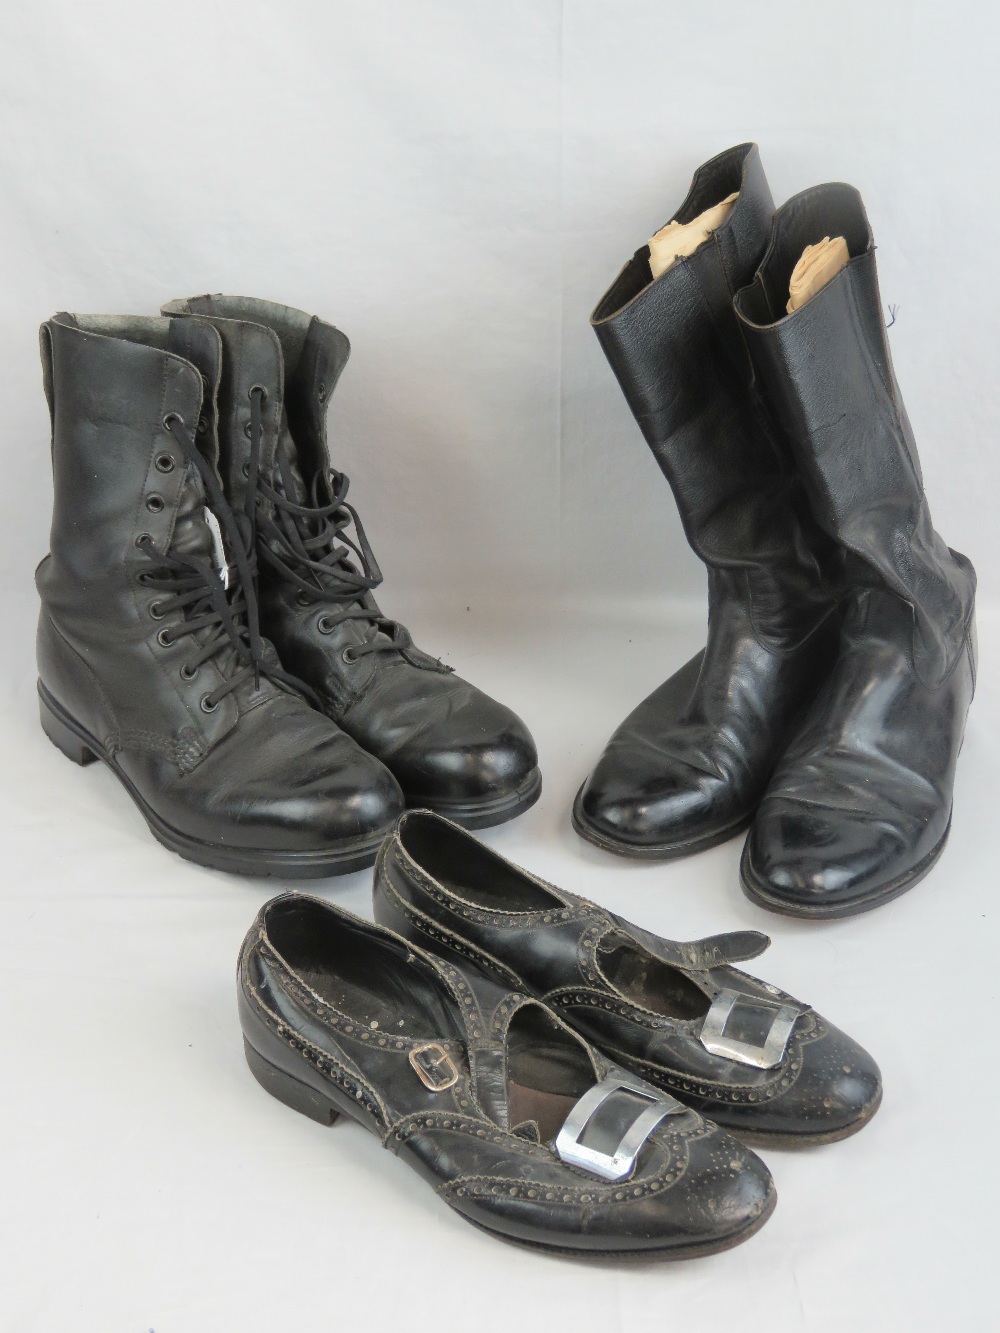 Two pairs of military boots together with a pair of buckled evening Highland shoes.